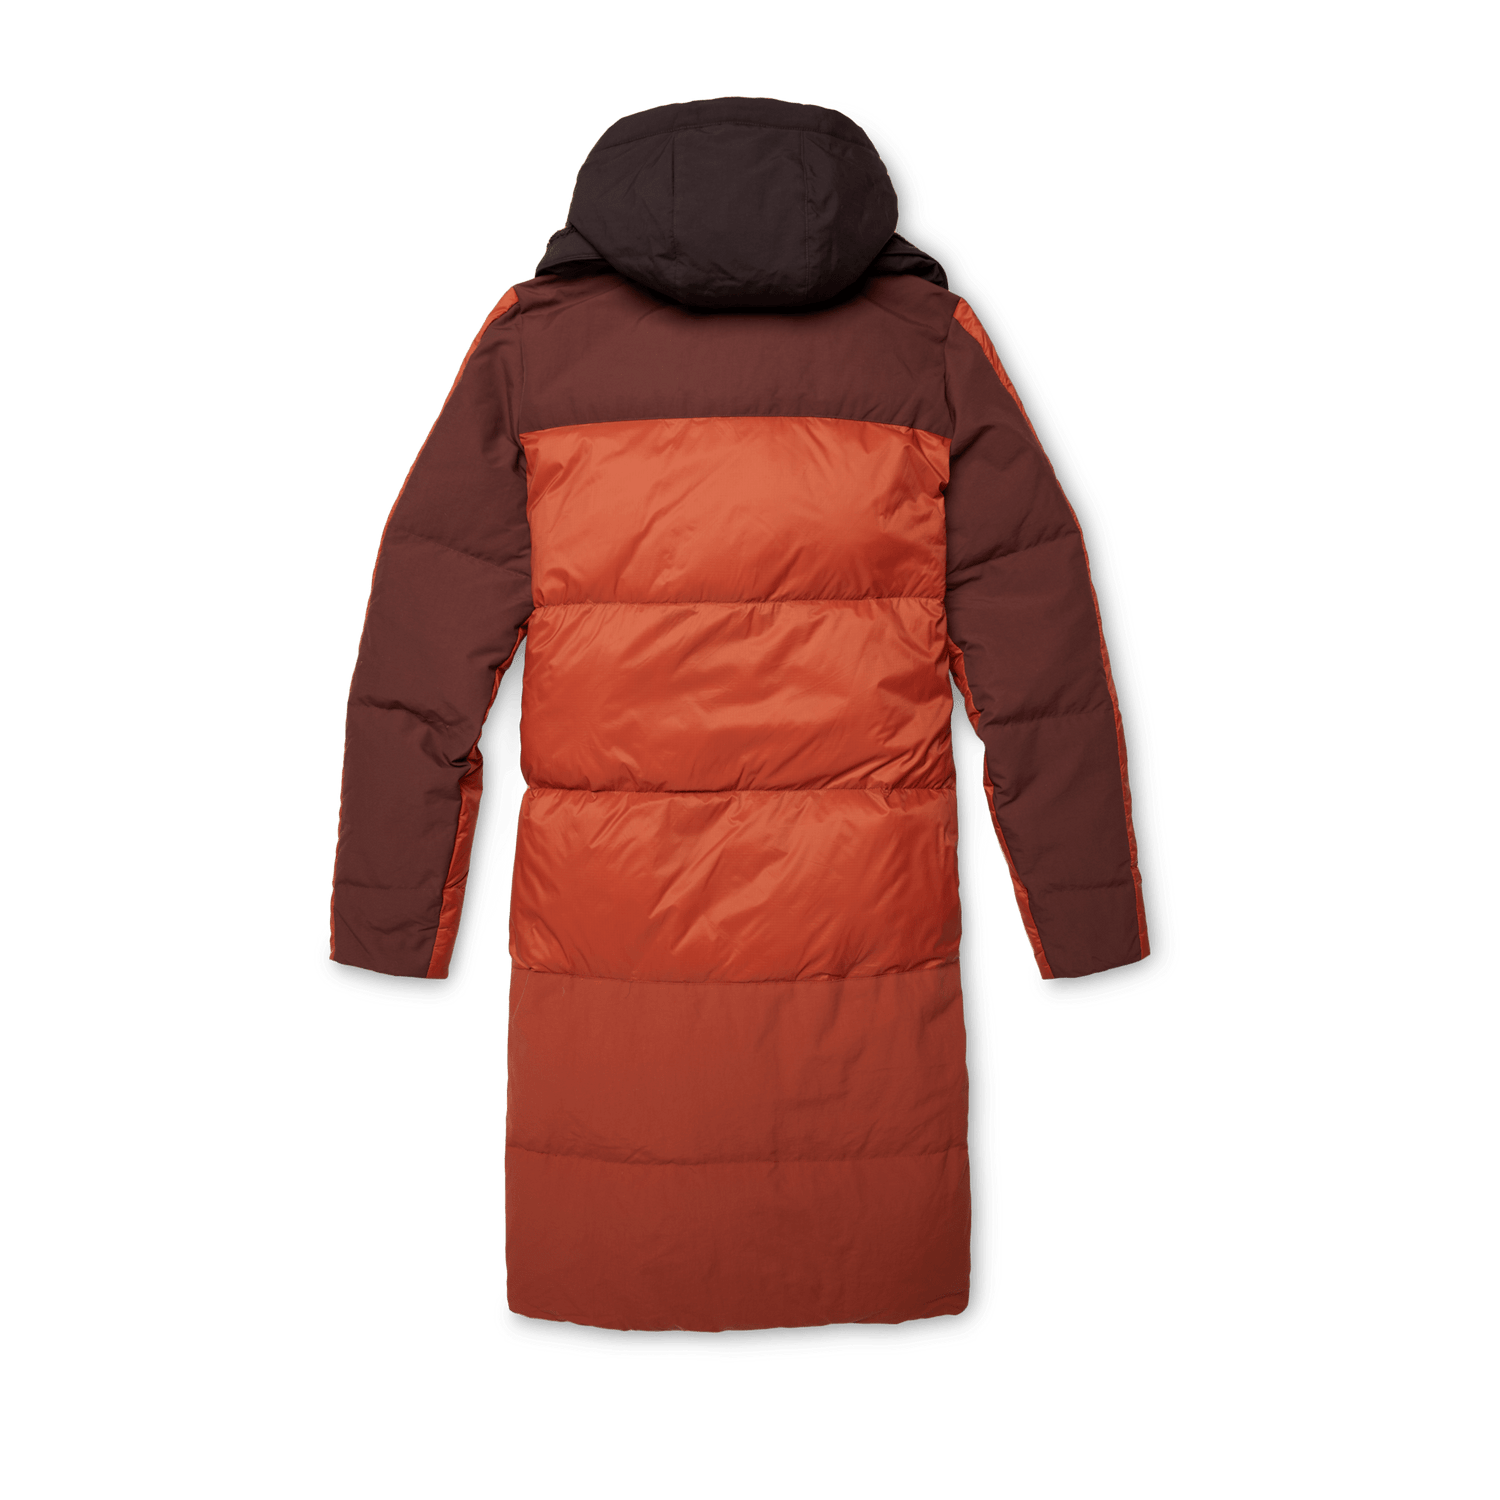 Cotopaxi W's Solazo Down Parka - Responsibly sourced down Cavern & Spice Jacket